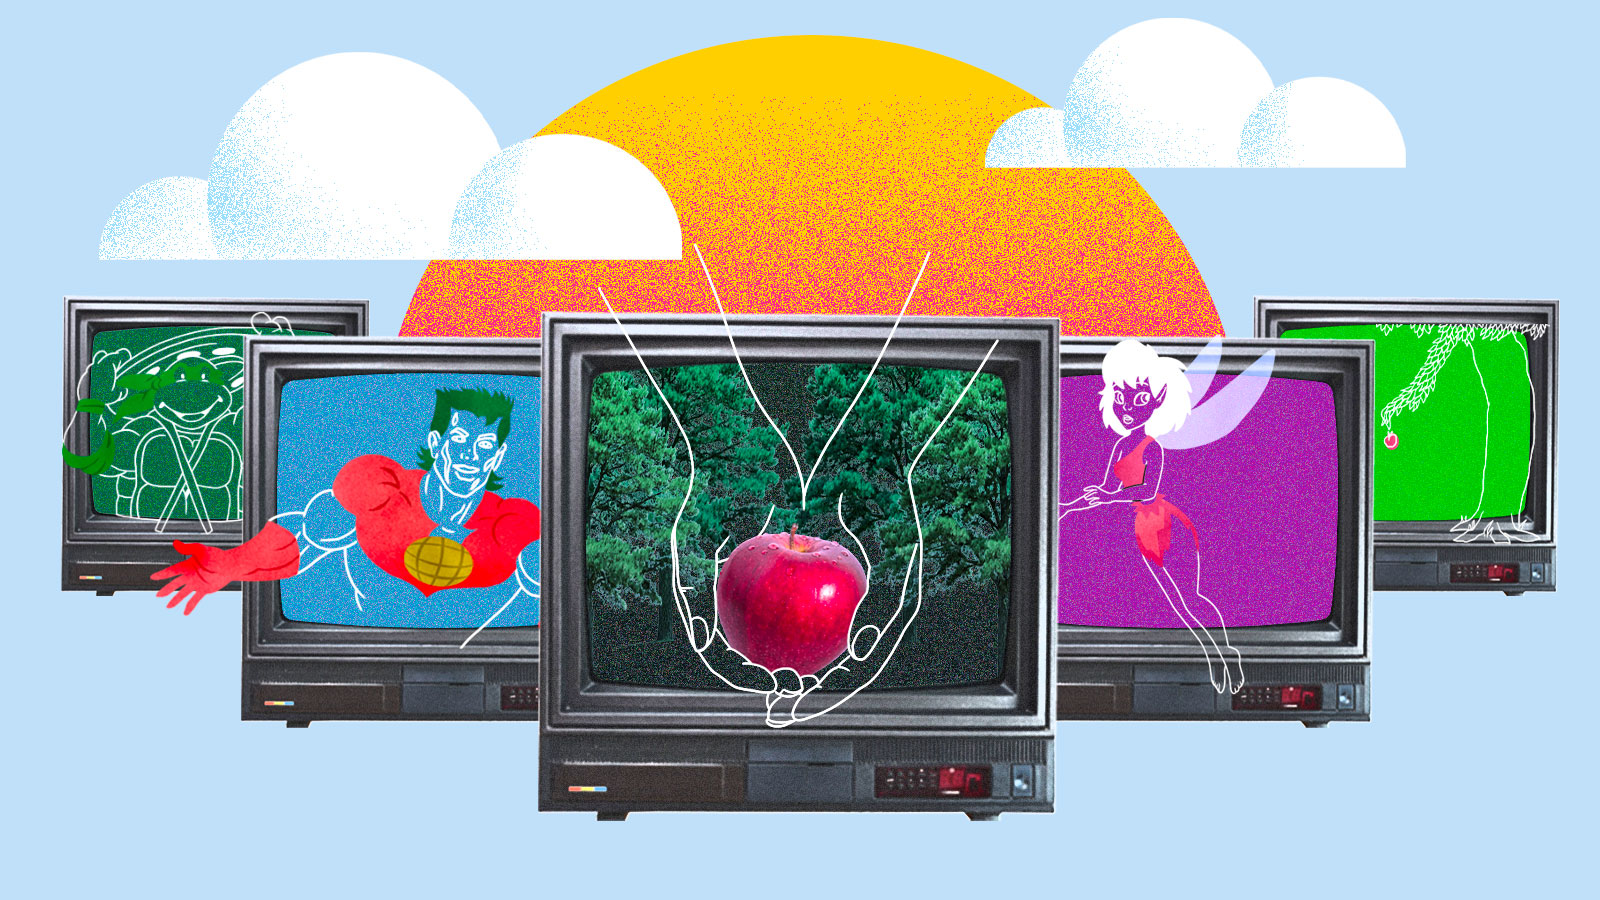 Collage: old TVs with images of nostalgic cartoons, books, and movies